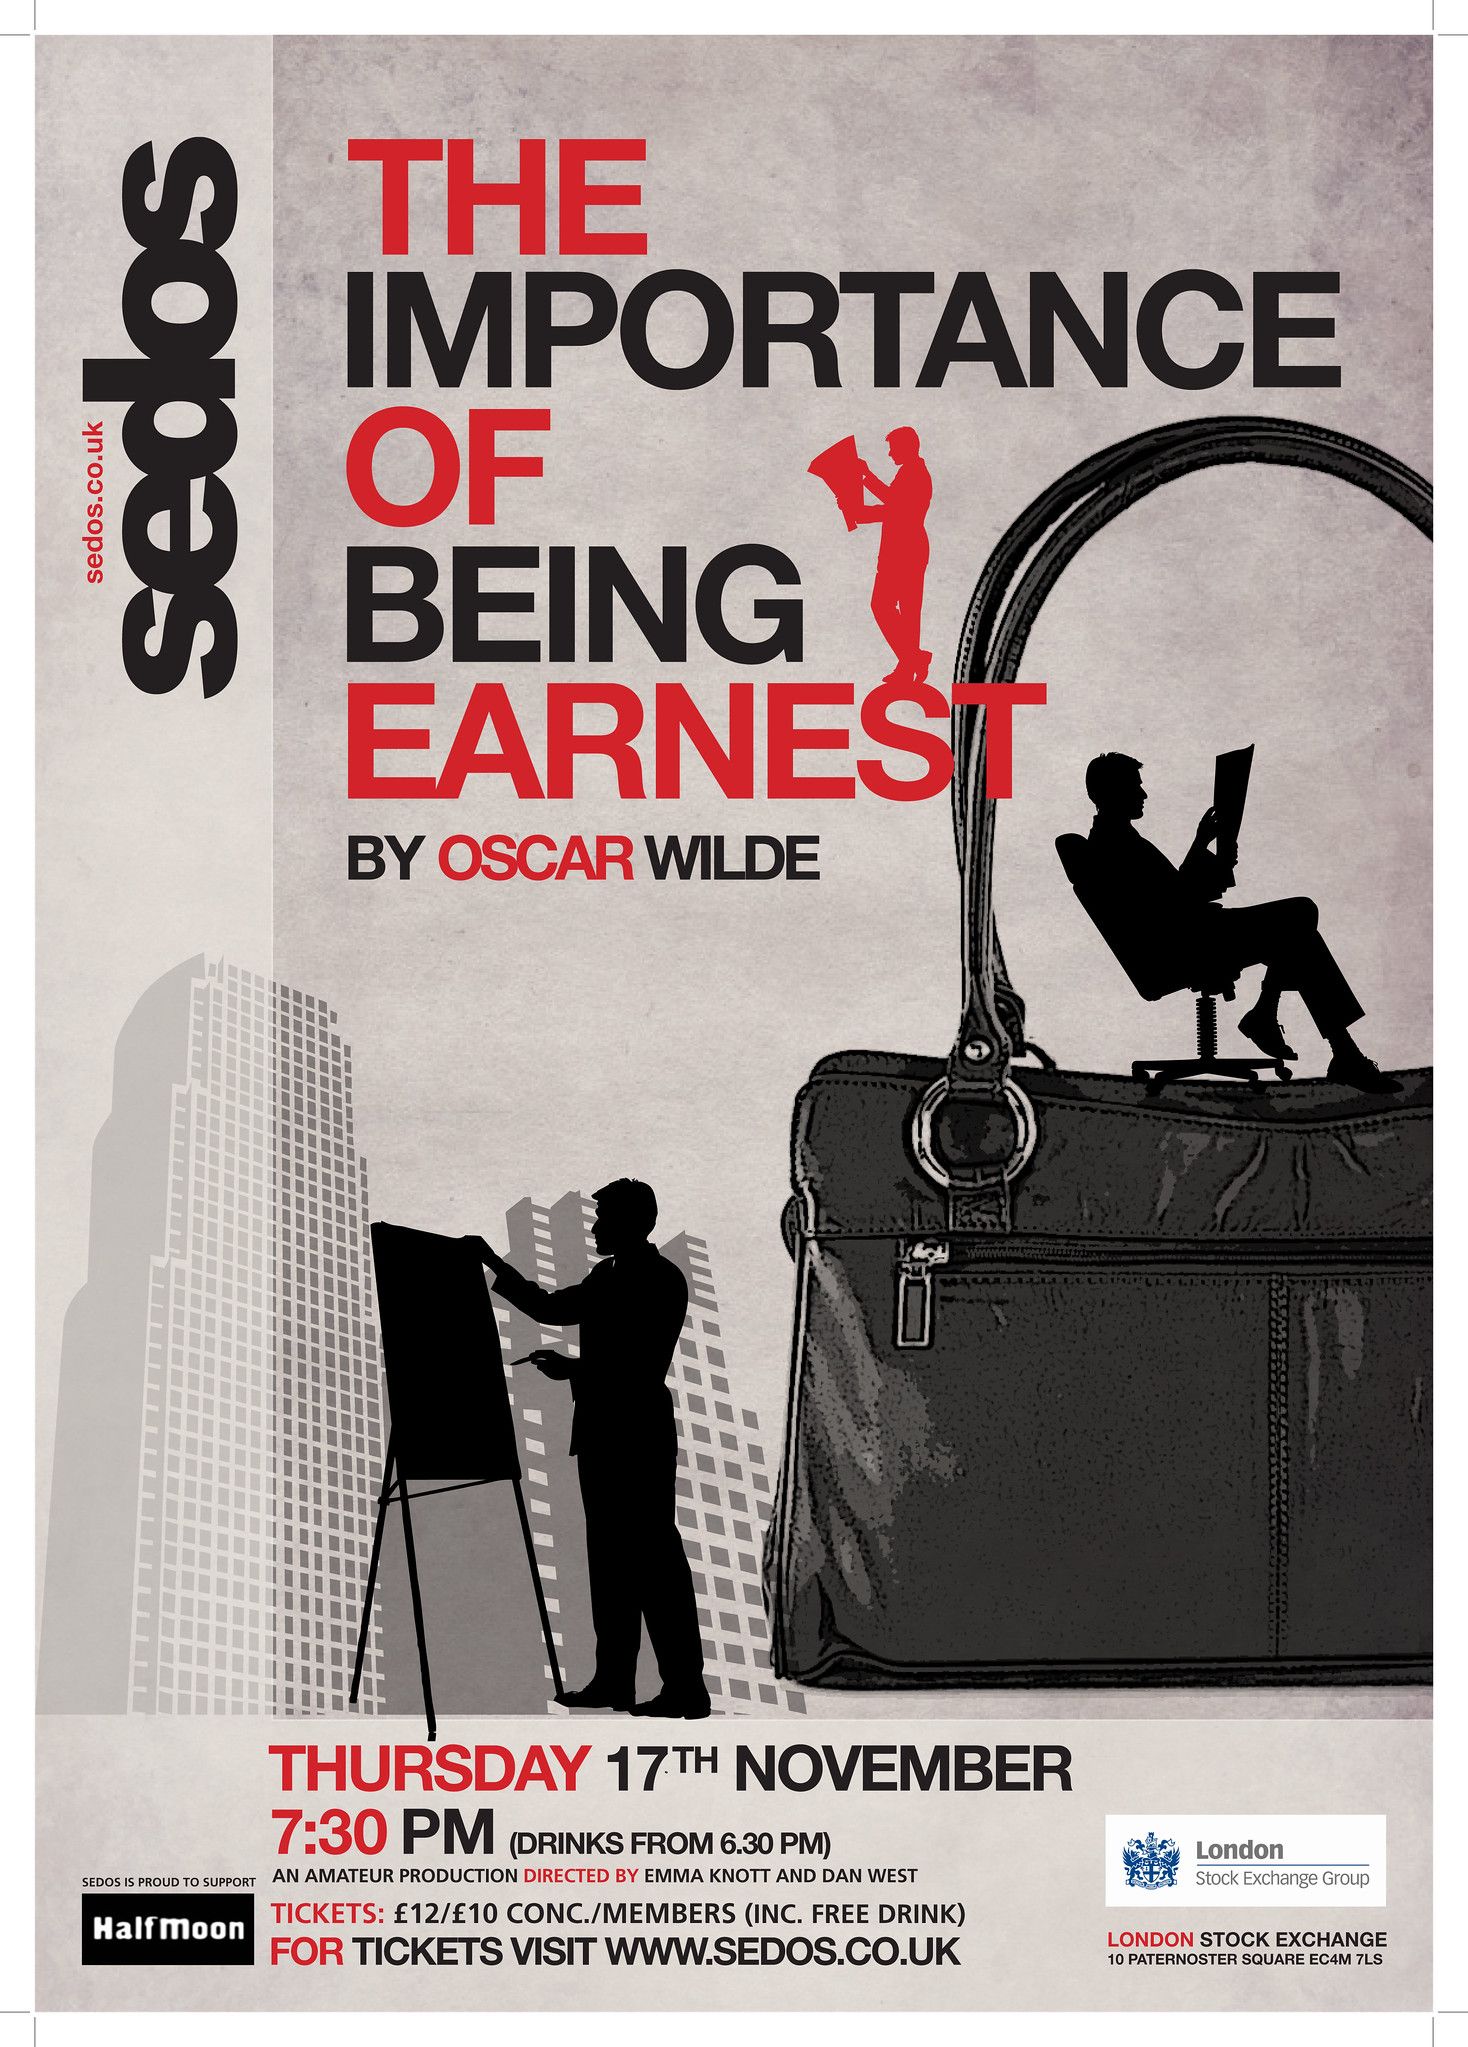 The Importance of Being Earnest  flyer image